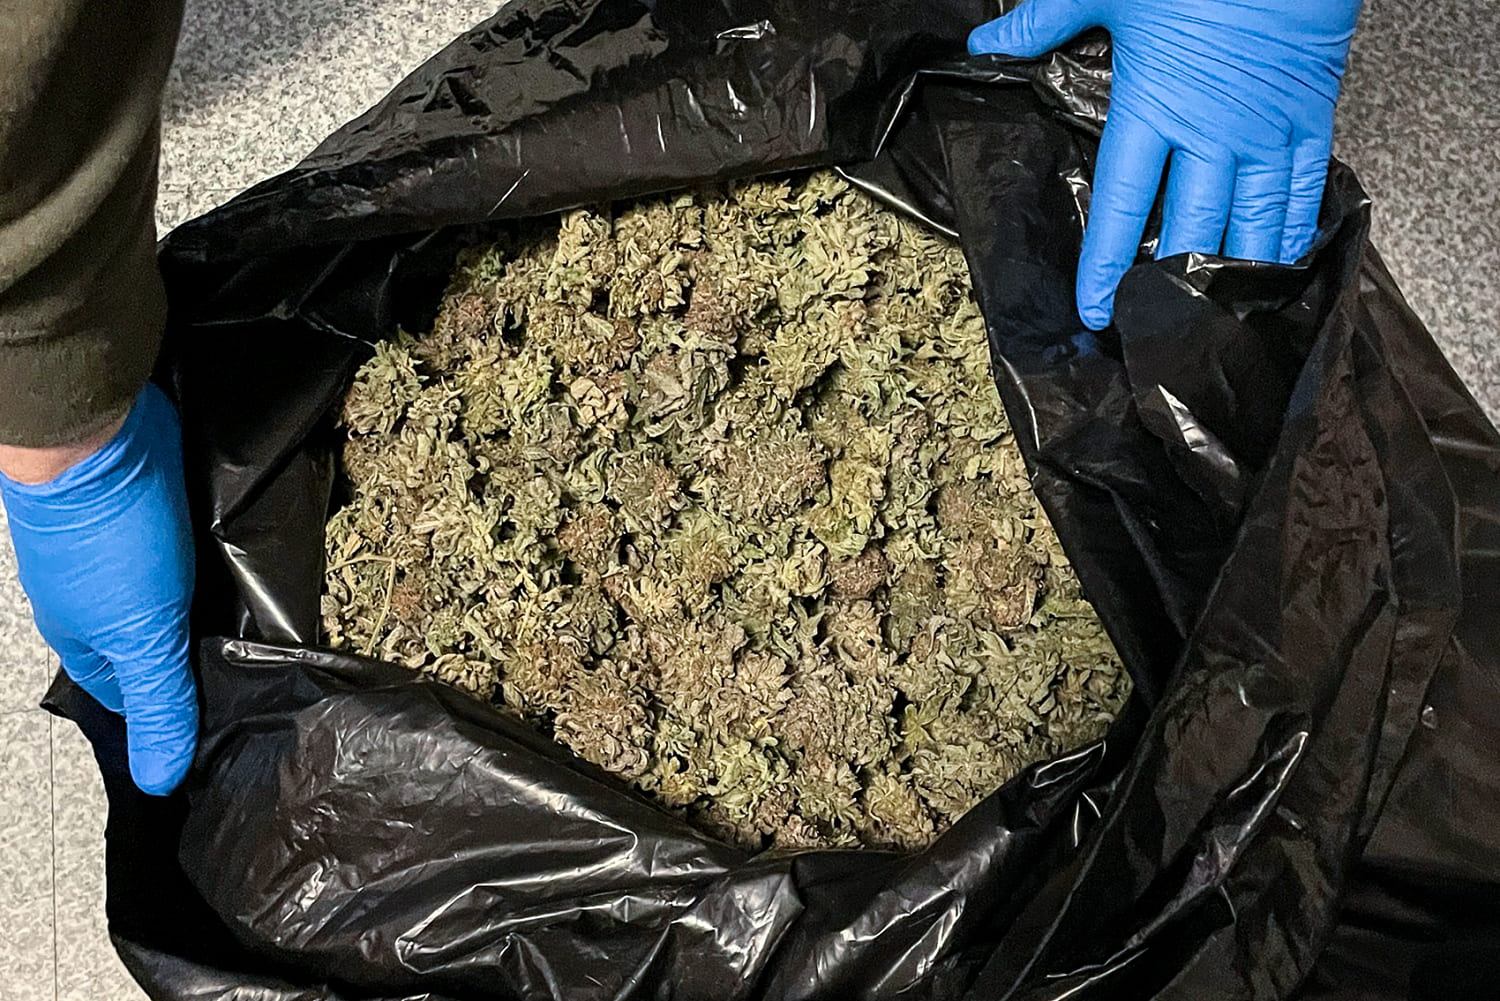 Marijuana grow busted in Maine as feds investigate trend in 20 states